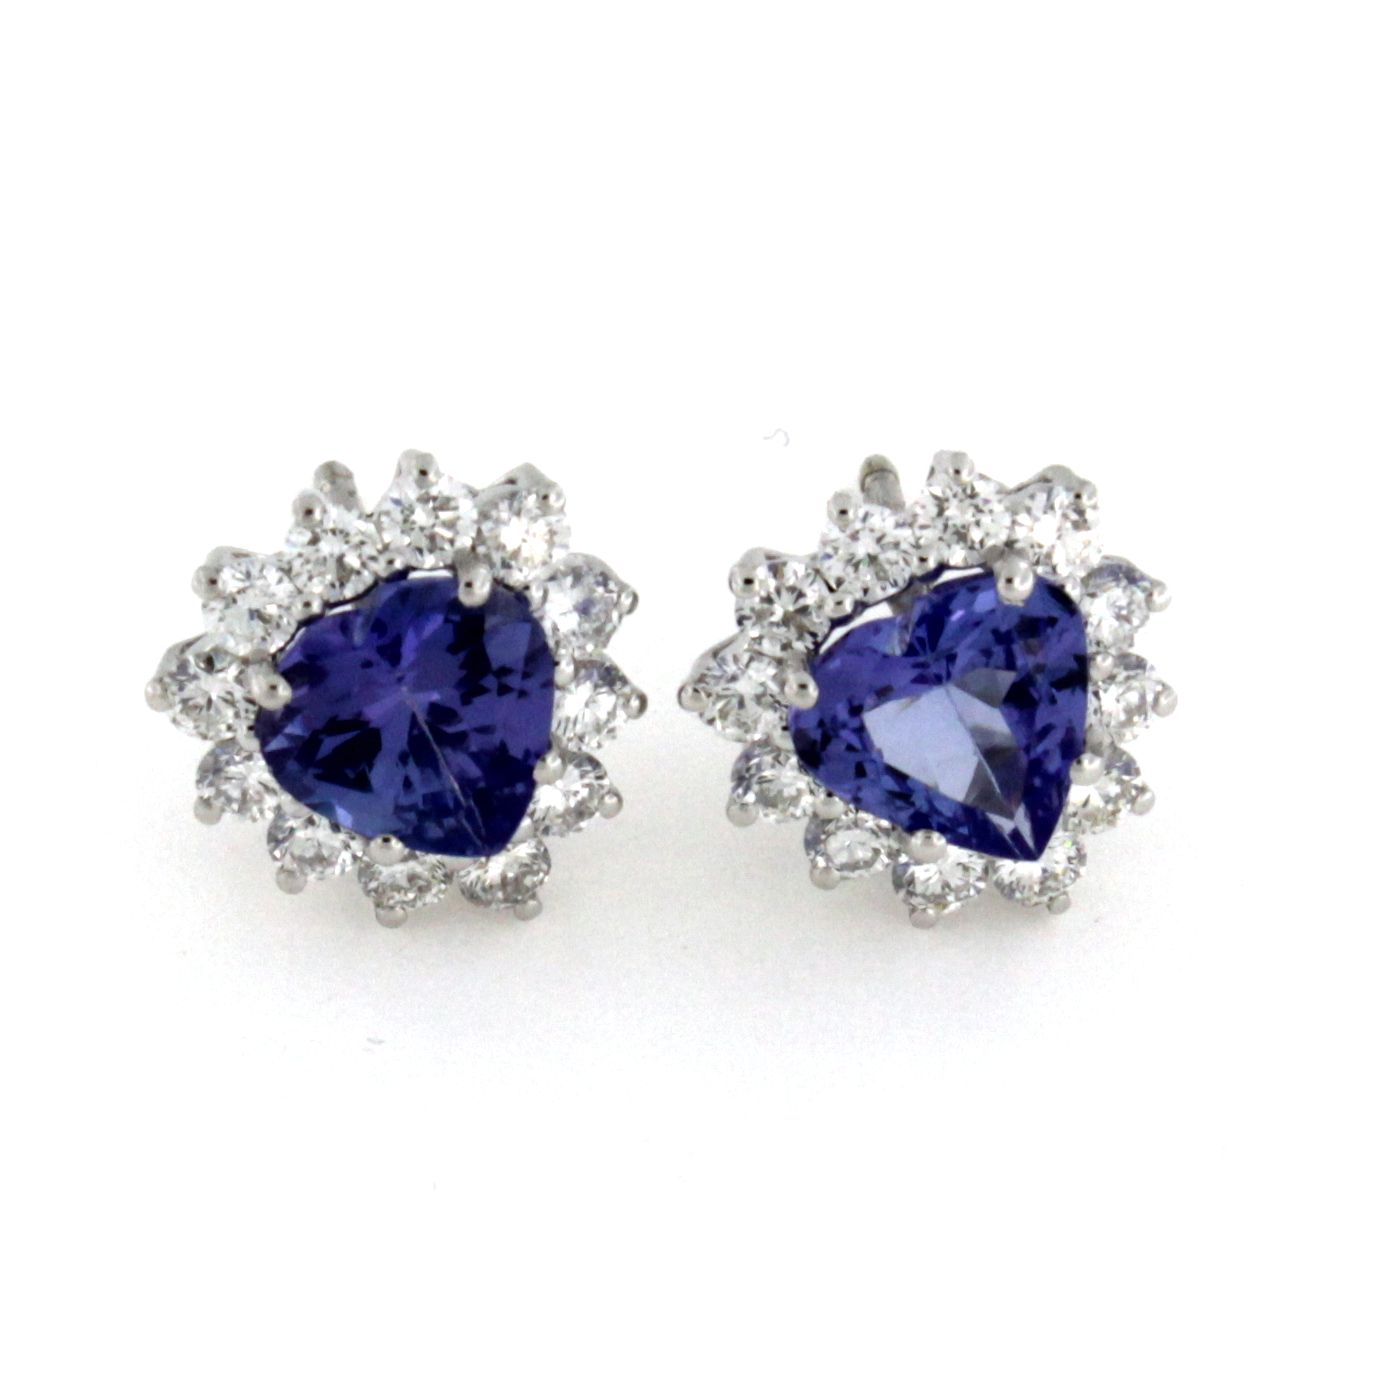 White gold earrings with Tanzanite heart shape and natural round brilliant dianonds.